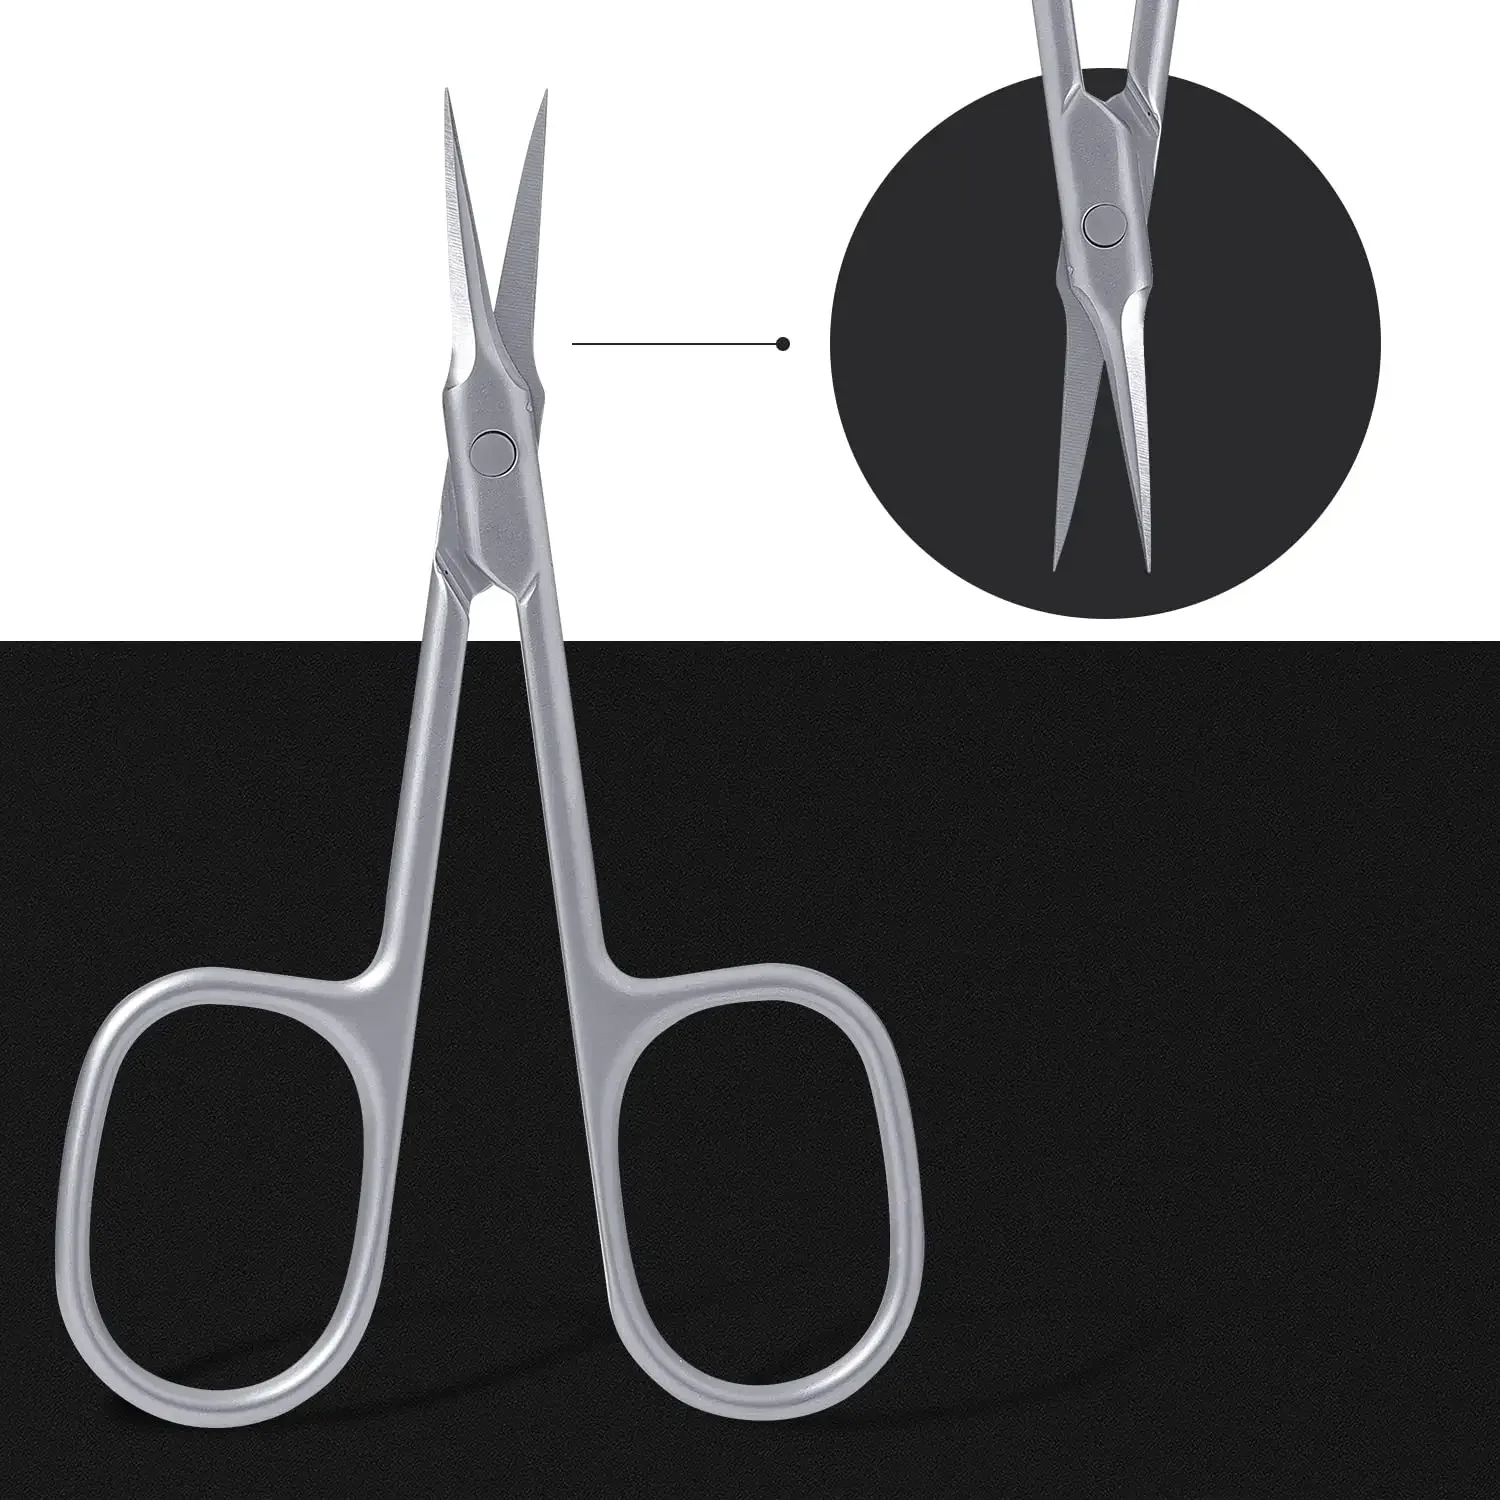 Cuticle Scissors Extra Fine Straight Curved Blade Scissors for Nails Eyebrow Eyelash Manicure Pedicure Beauty Grooming